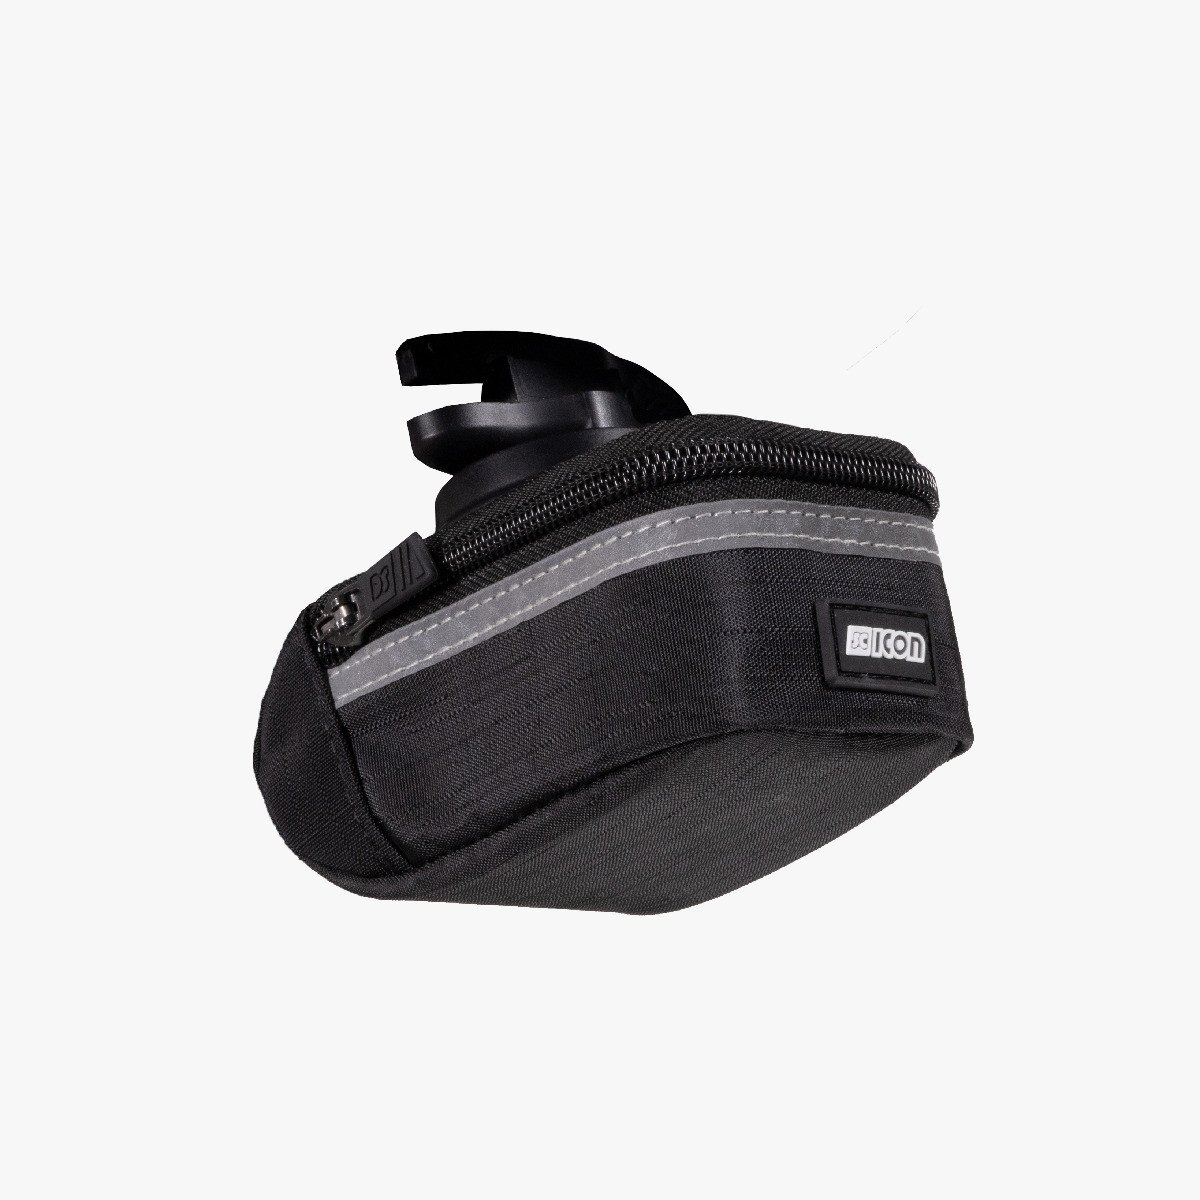 soft 350 small quick release cycling saddle bag